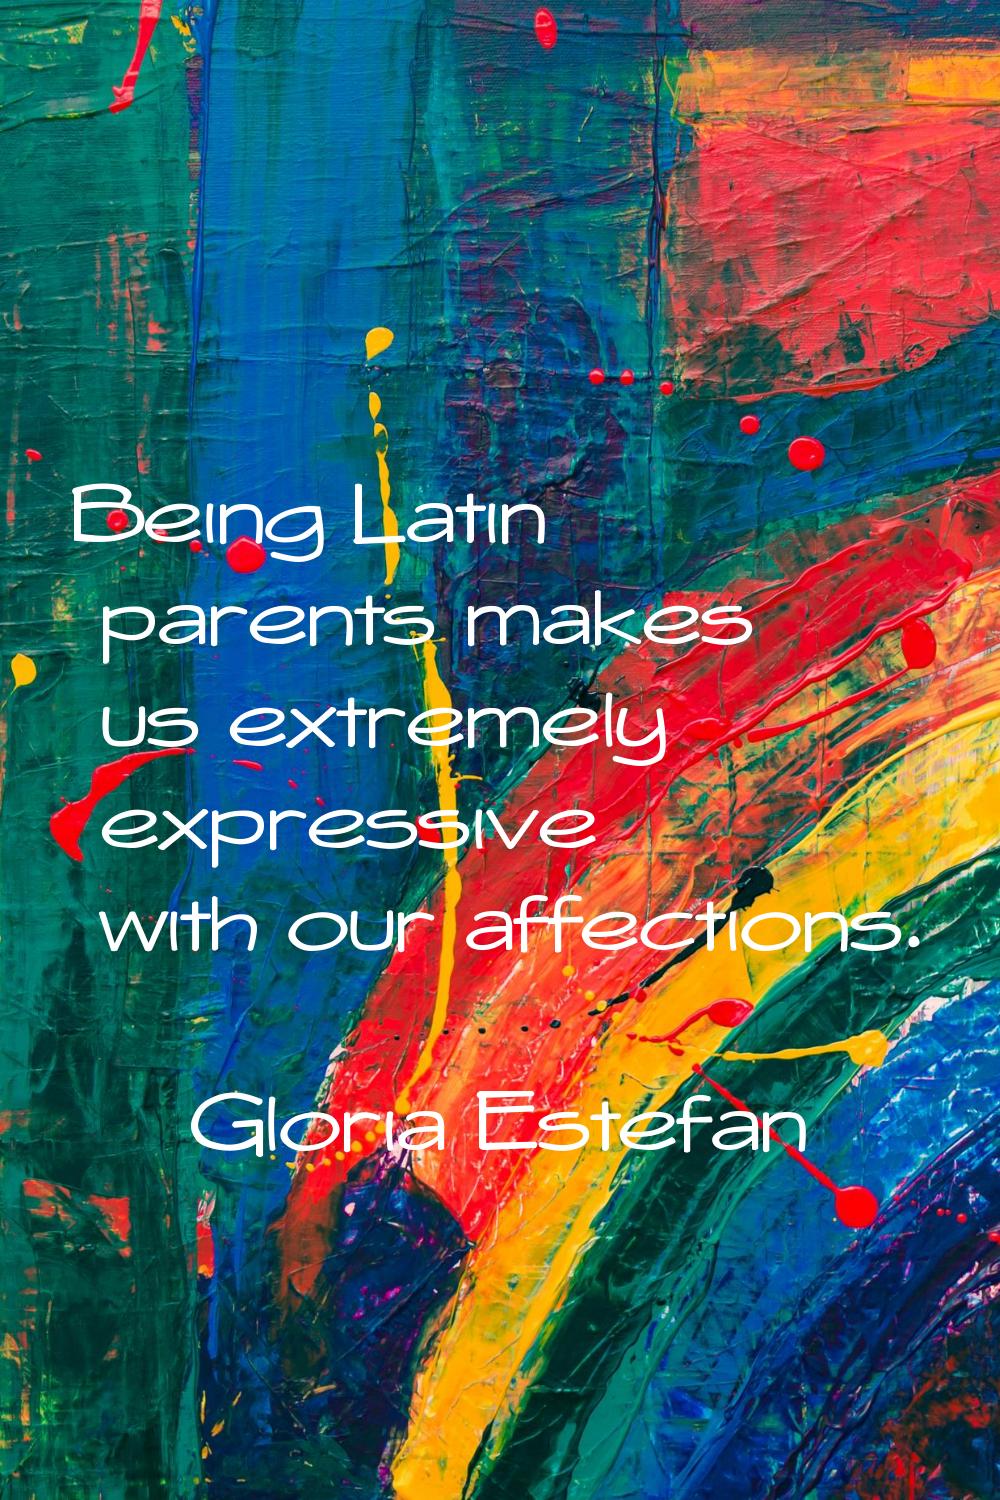 Being Latin parents makes us extremely expressive with our affections.